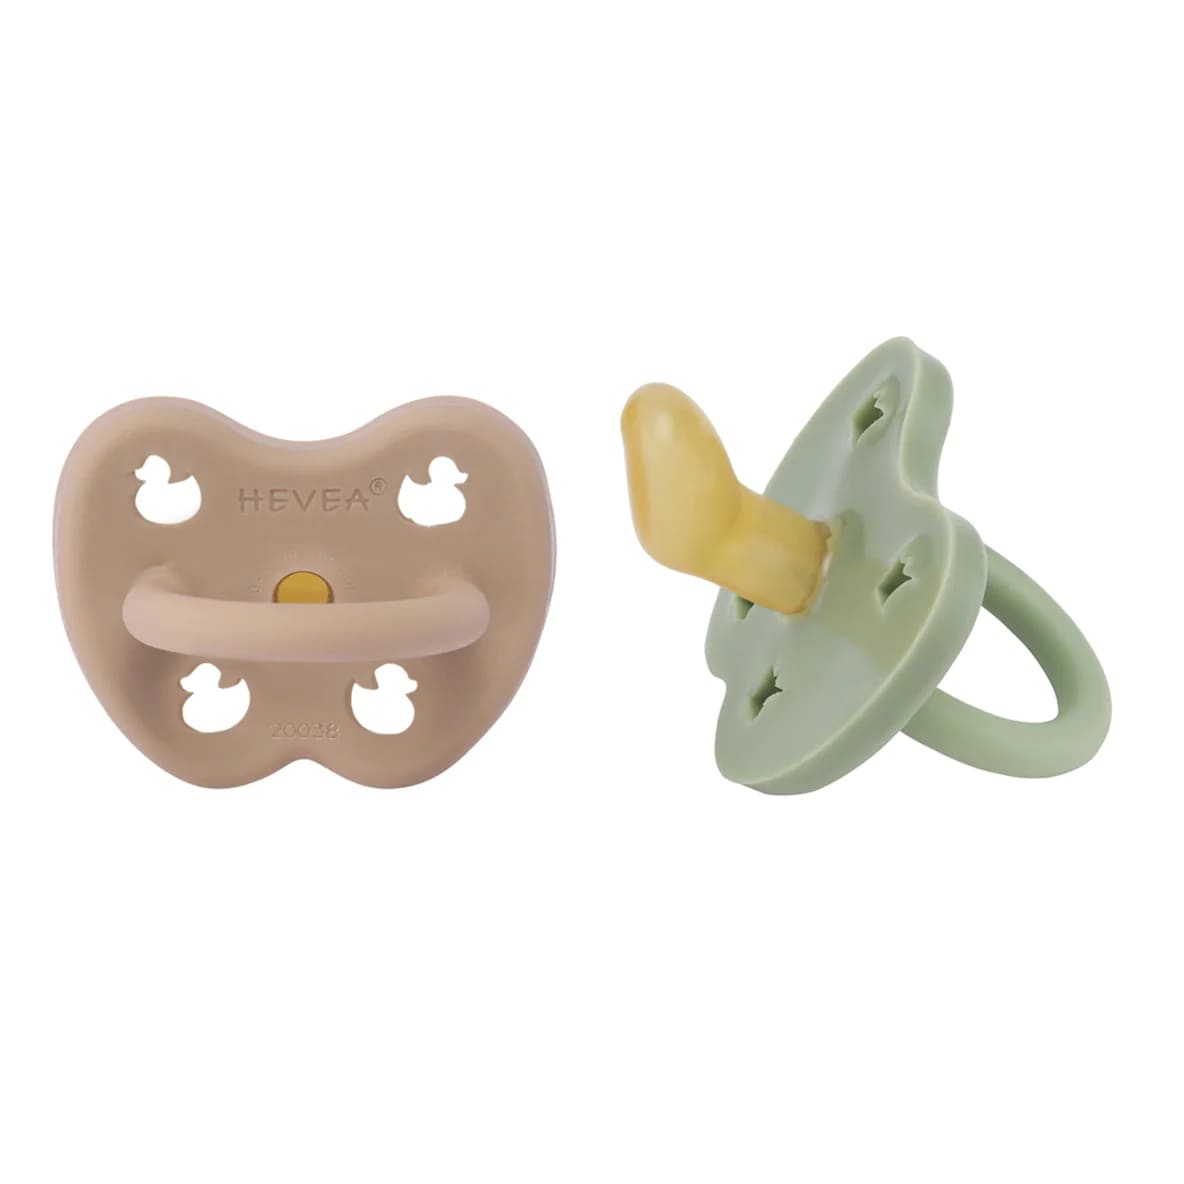 Hevea Natural Rubber Pacifier Orthodontic 3-36 Months Two-pack Tan Beige & Moss Green HE-CP-O-2PK-TB-MG-3-36